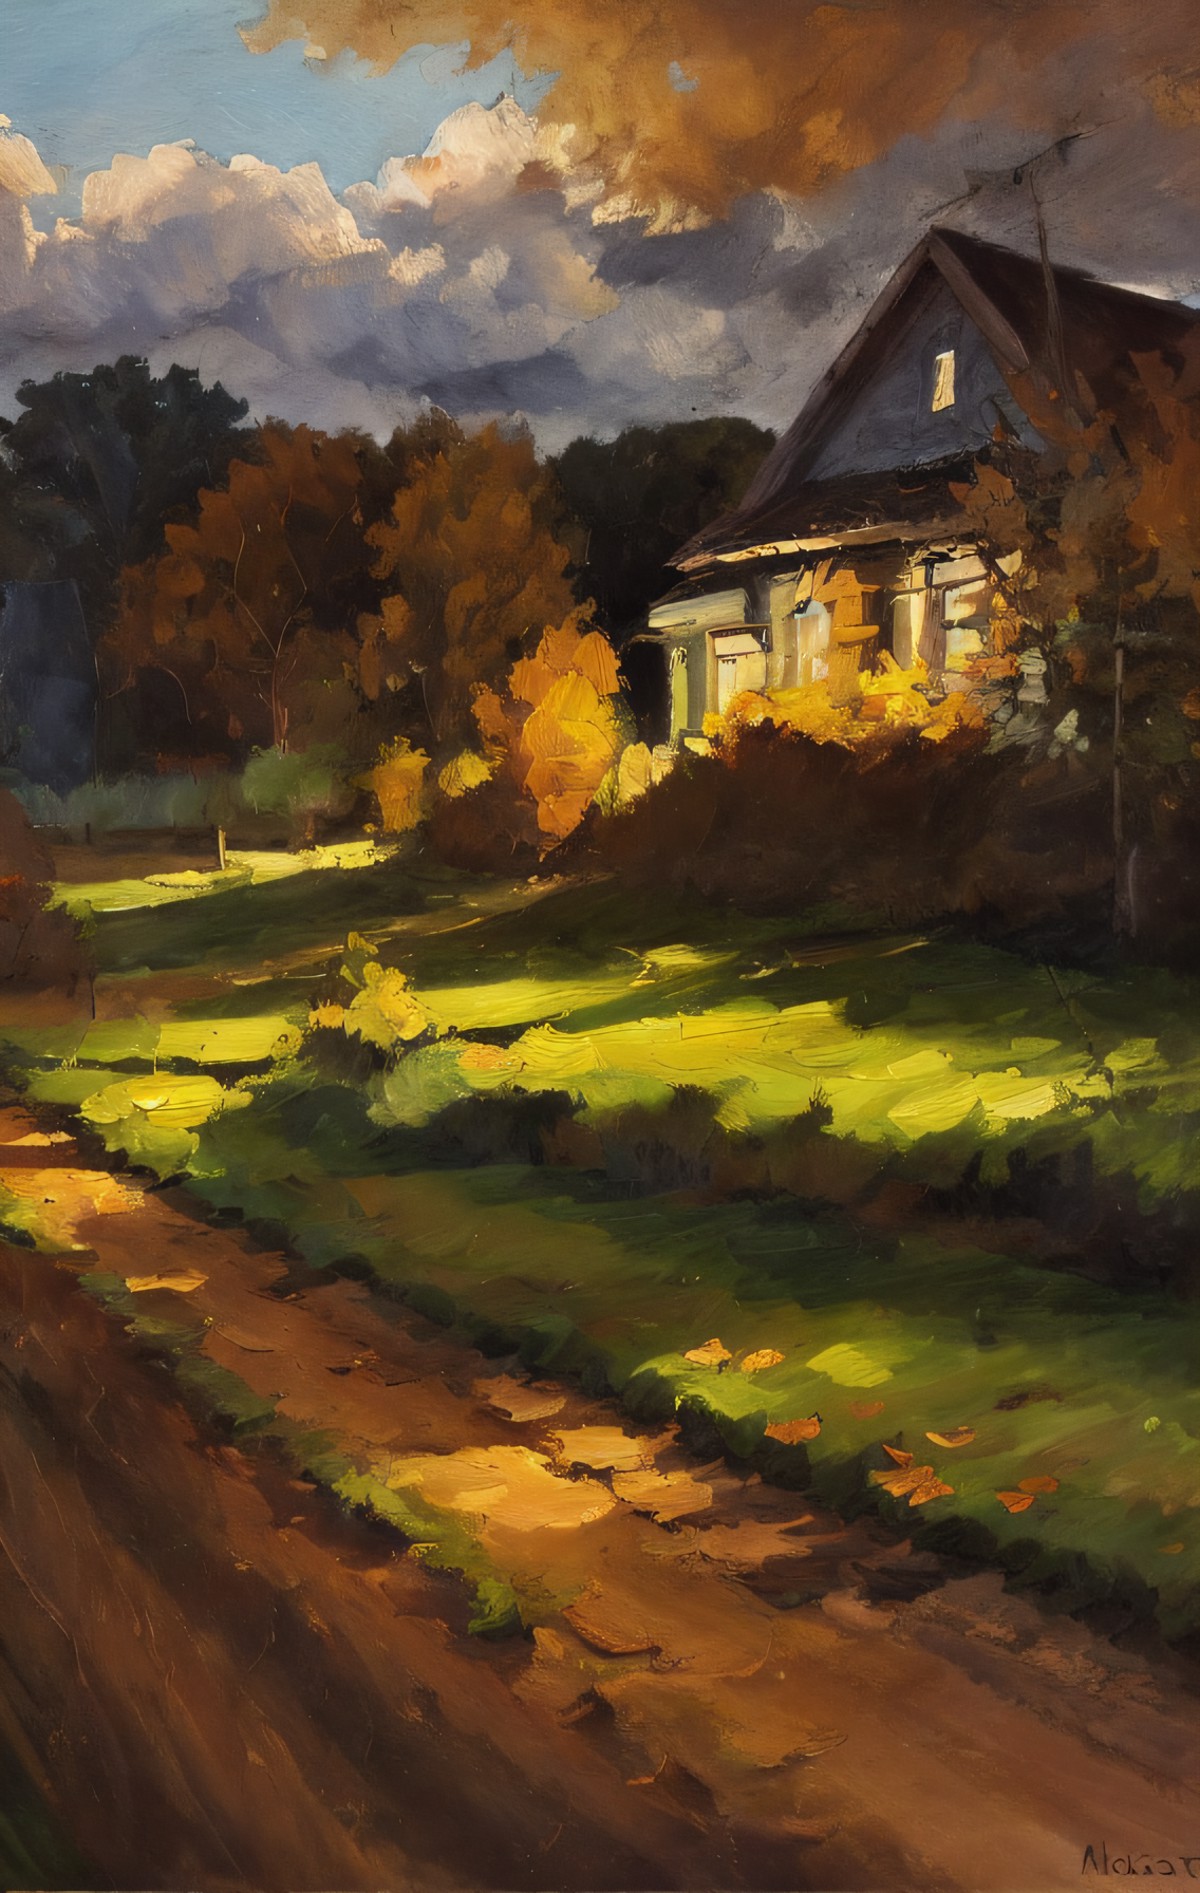 (a painting by mse) blue hour, fall, smooth, aesthetic, house in a field, clouds, a dirt path leading to the house,